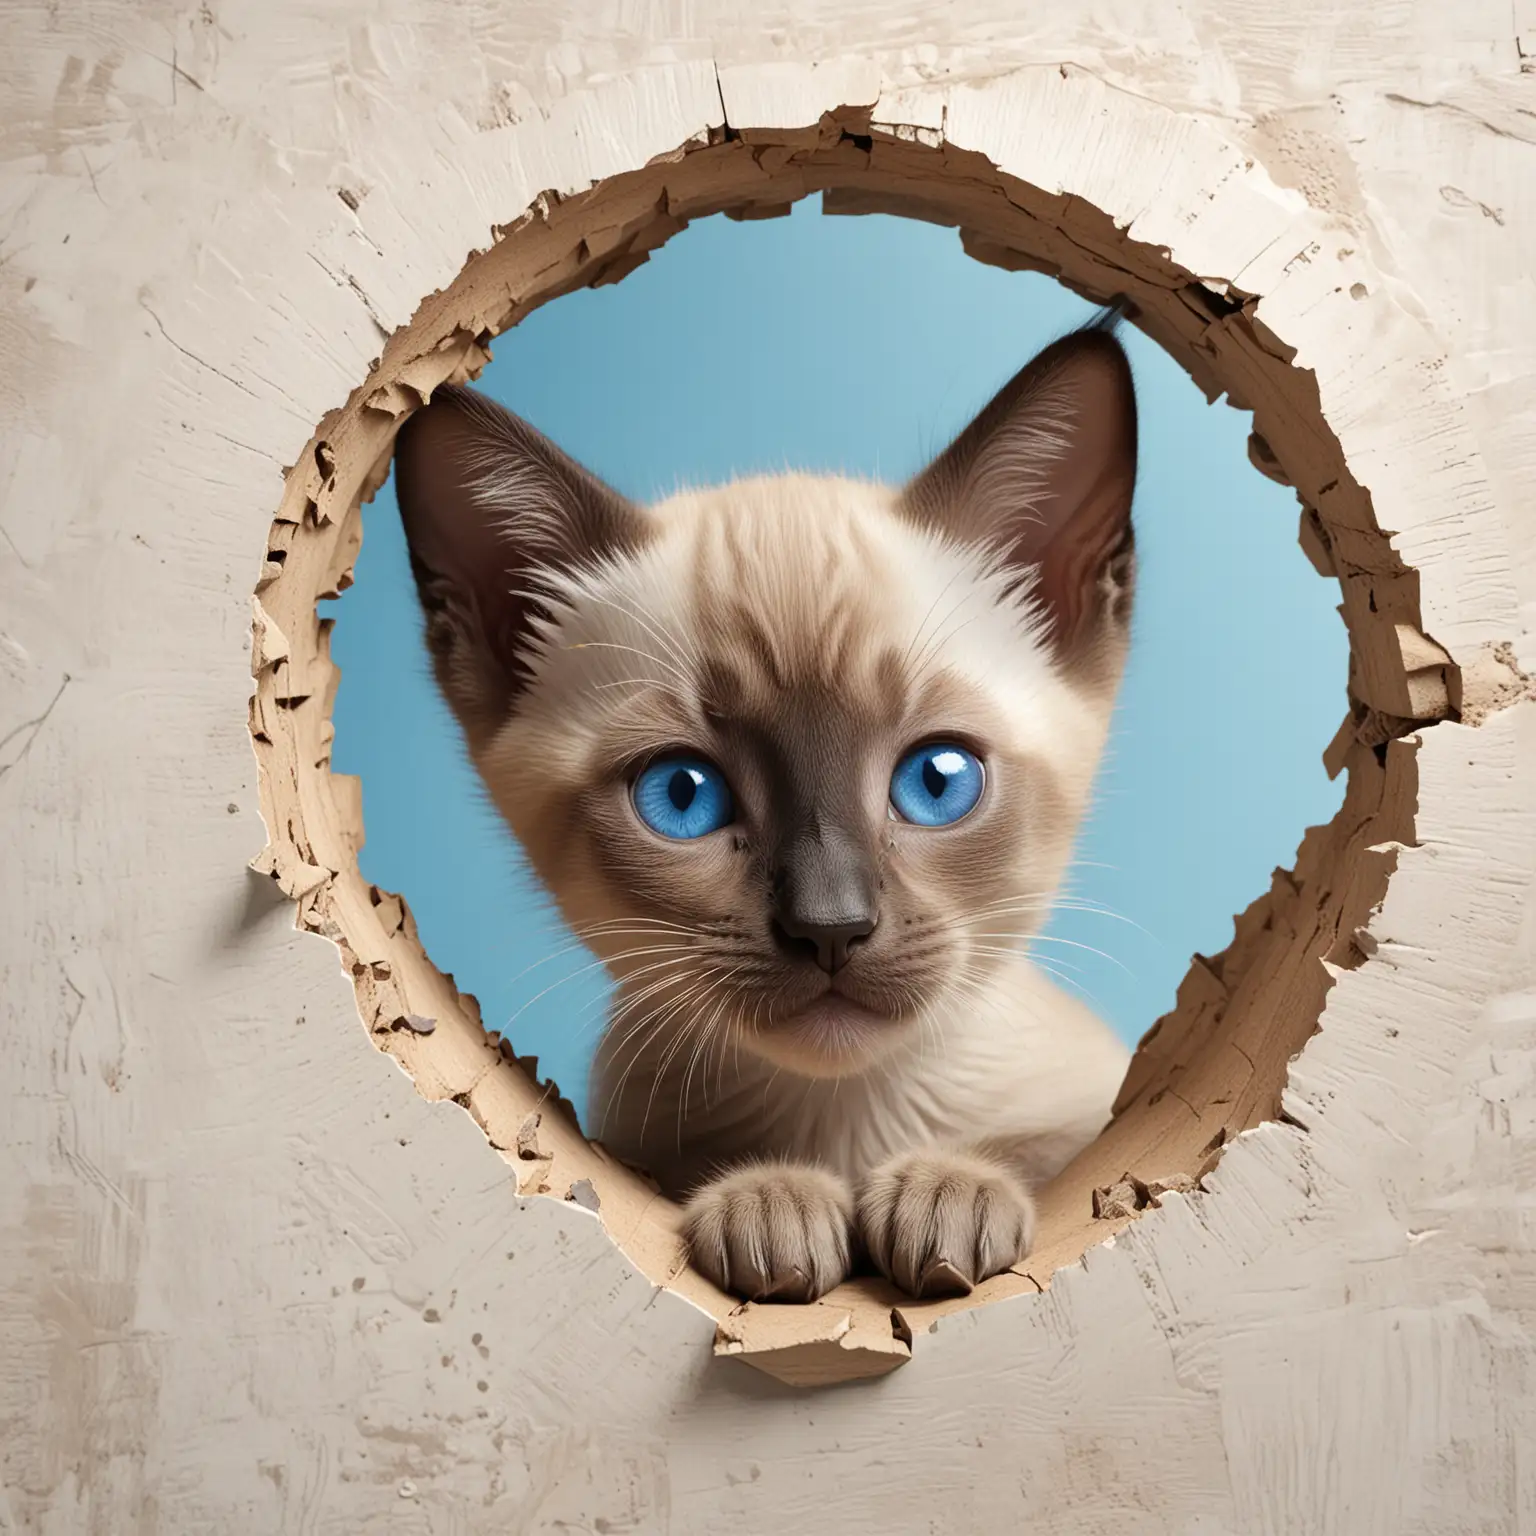 A whimsical 3D render of a playful Siamese kitten peeking out of a hole in a cracked white ceramic wall. The kitten has striking bright blue eyes The cracked wall adds a sense of character and story, while the overall composition creates a delightful and conceptual art piece., conceptual art, 3d render

